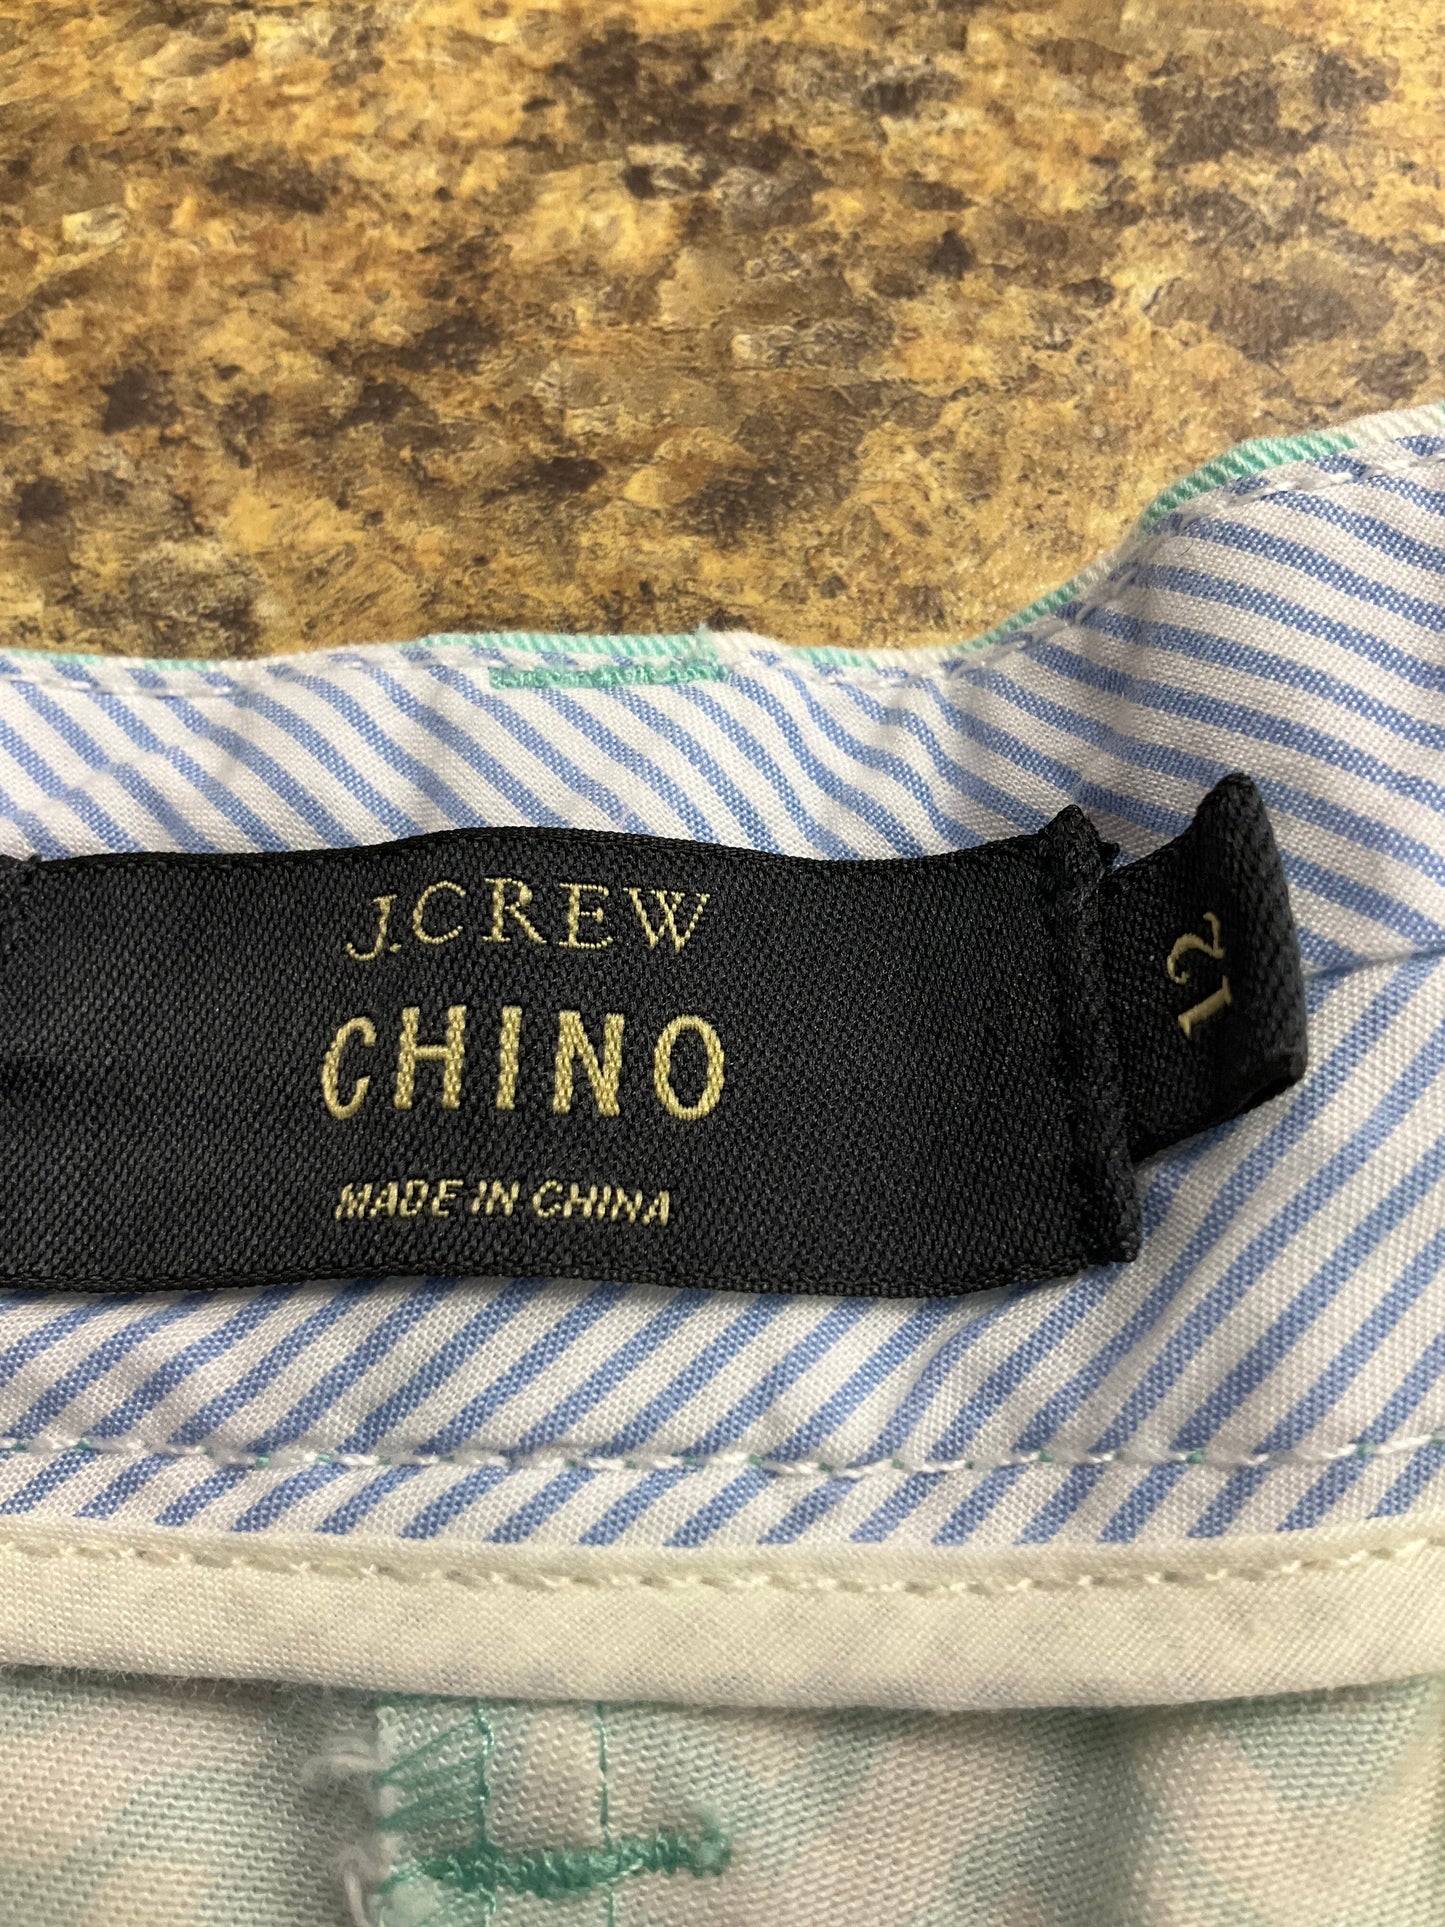 Shorts By J Crew  Size: 12